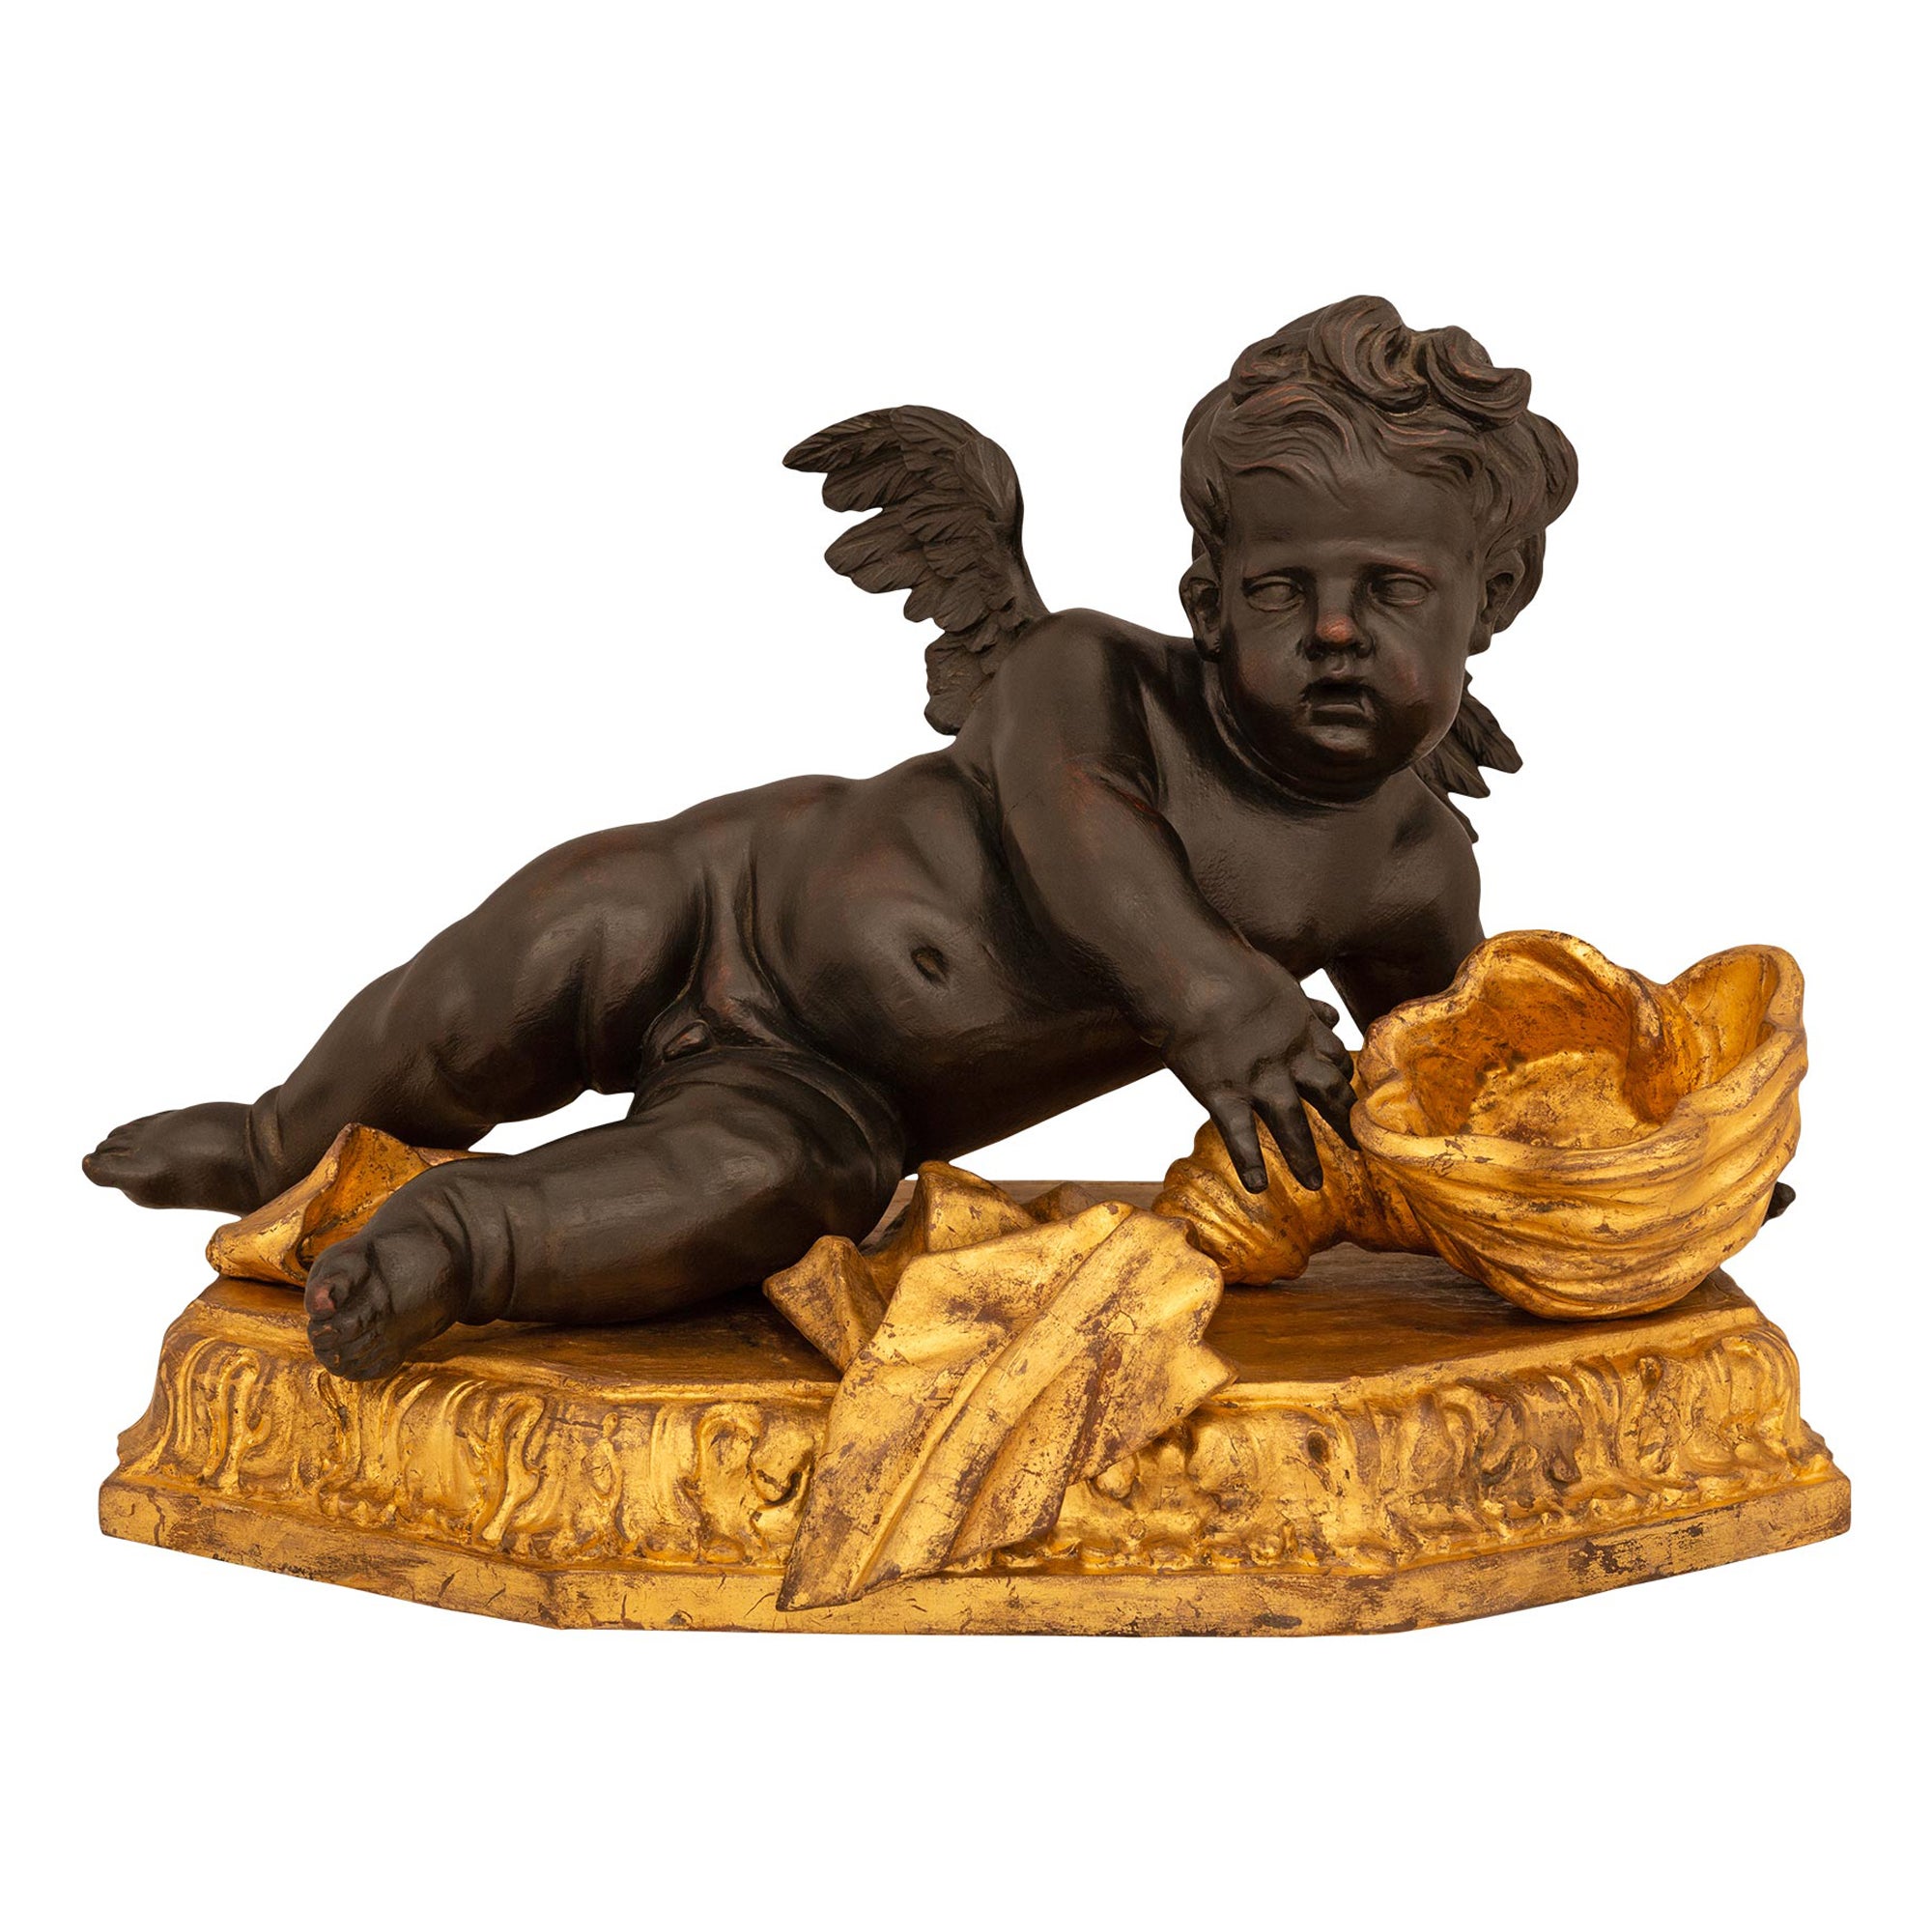 Italian 17th Century Baroque Period Giltwood And Patinated Wood Putti Statue